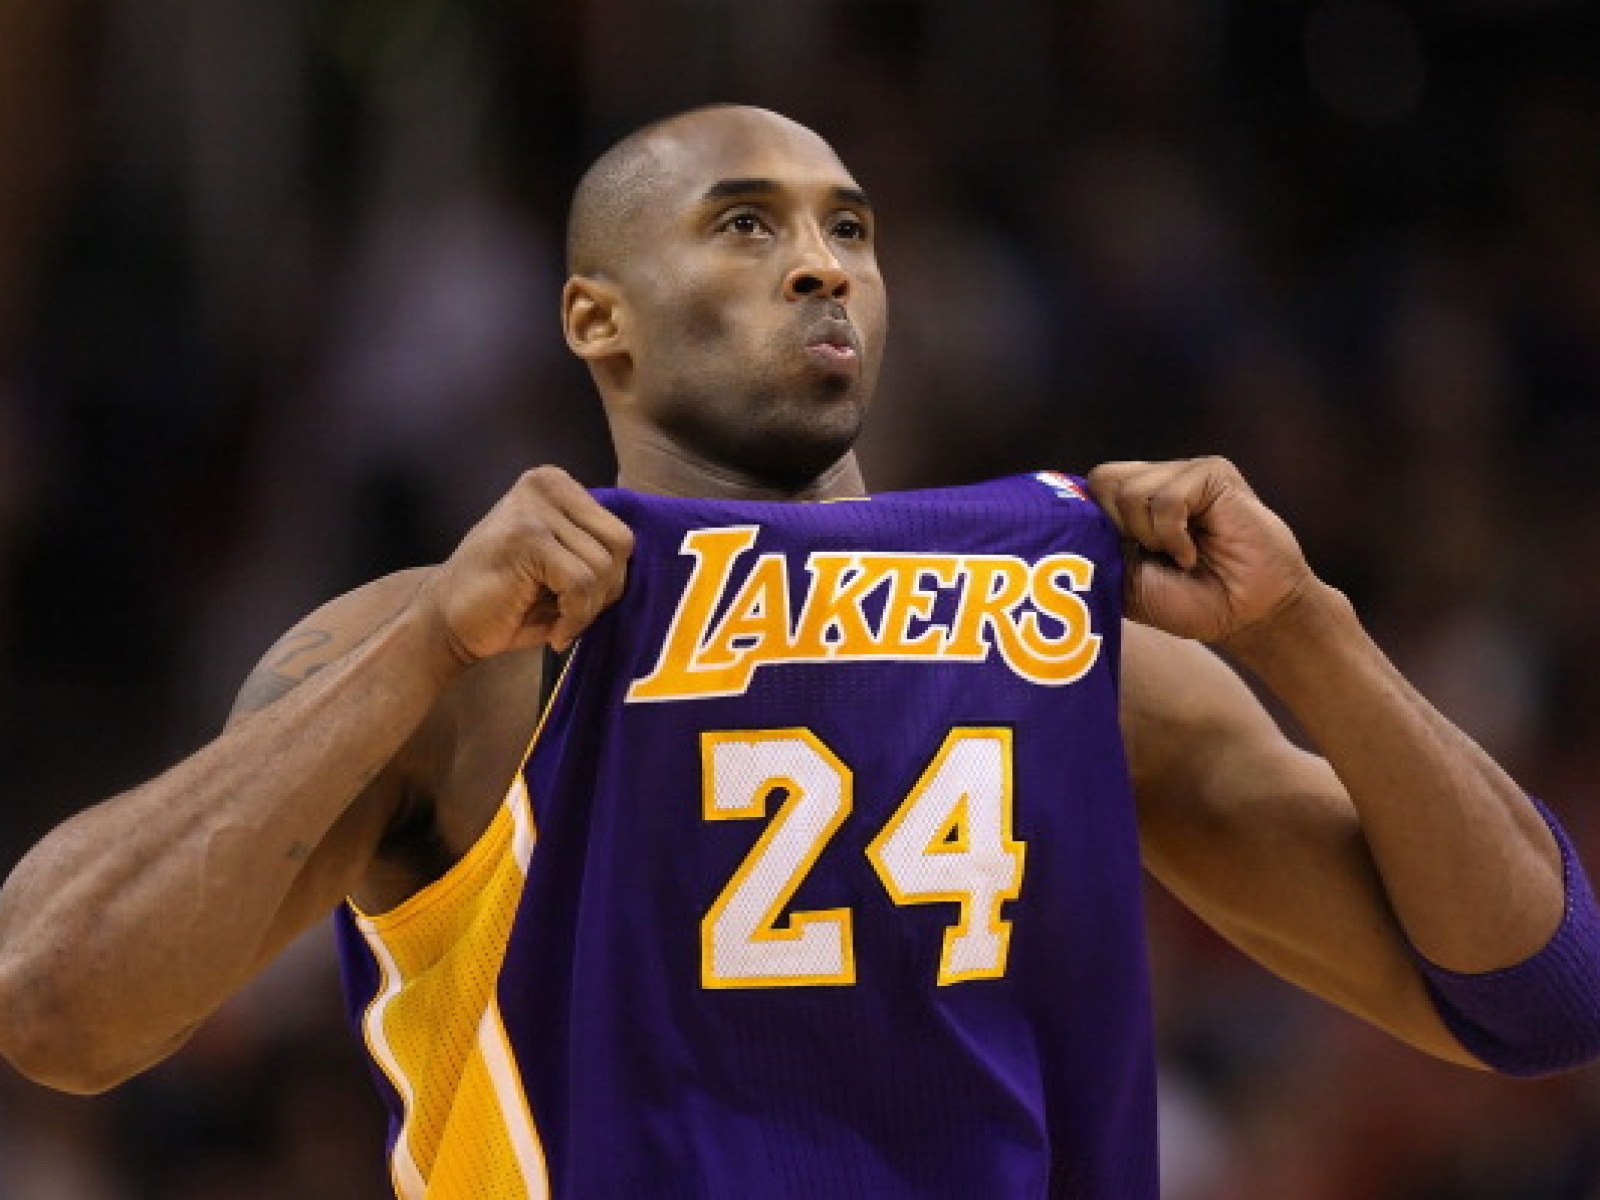 Kobe Bryant's storied legacy, both good and bad, thrives in